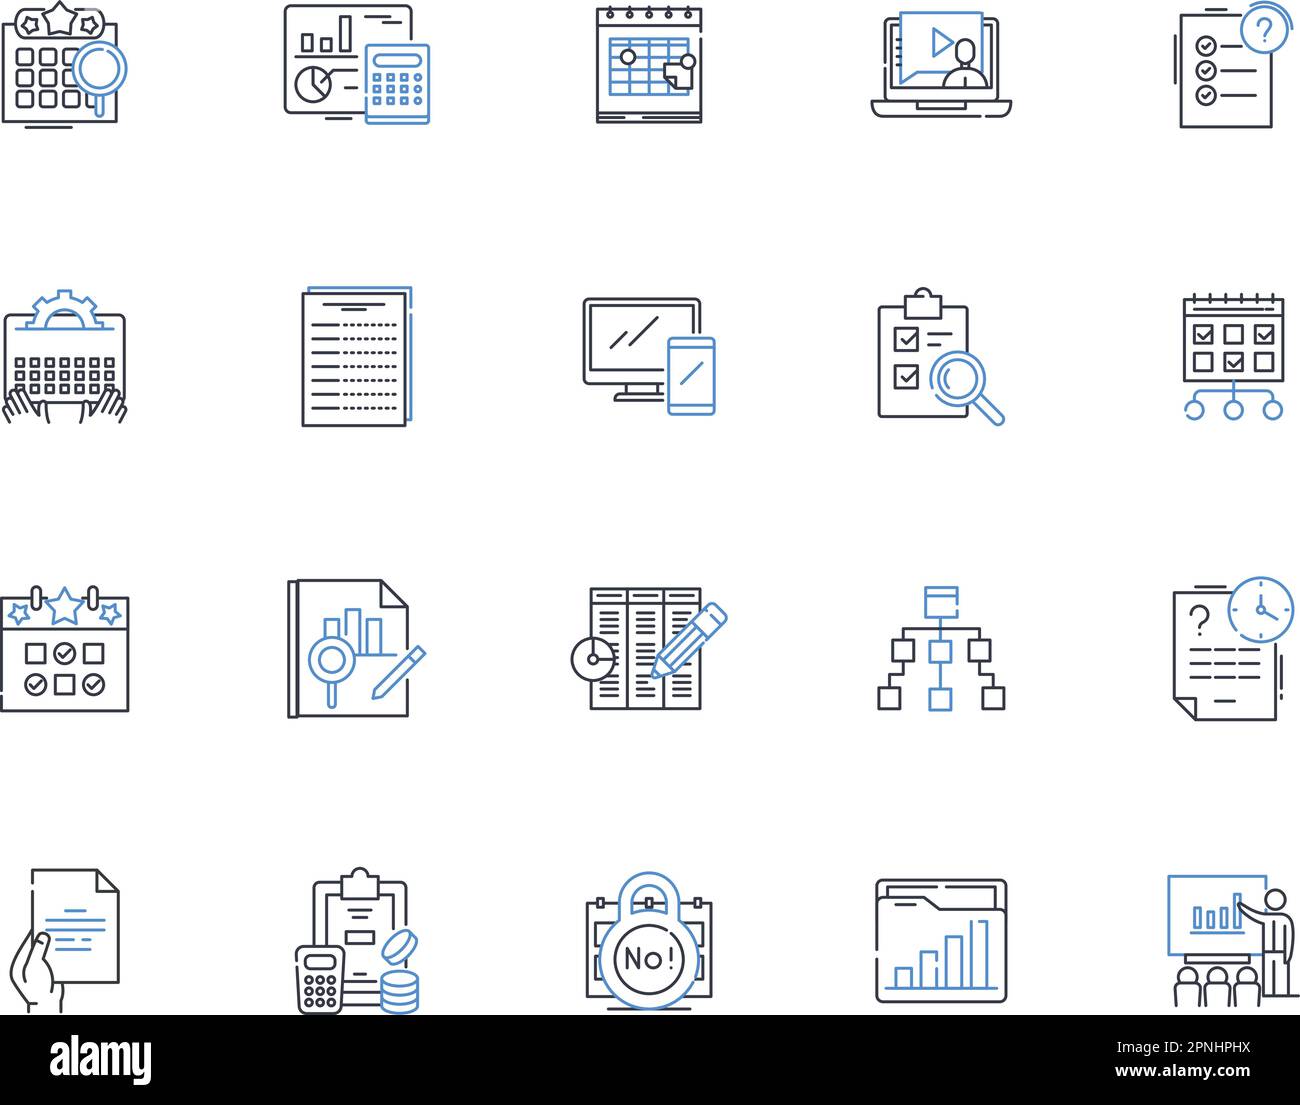 Calendar line icons collection. Schedule, Dates, Events, Planner, Reminders, Appointments, Time vector and linear illustration. Meetings,Deadlines Stock Vector